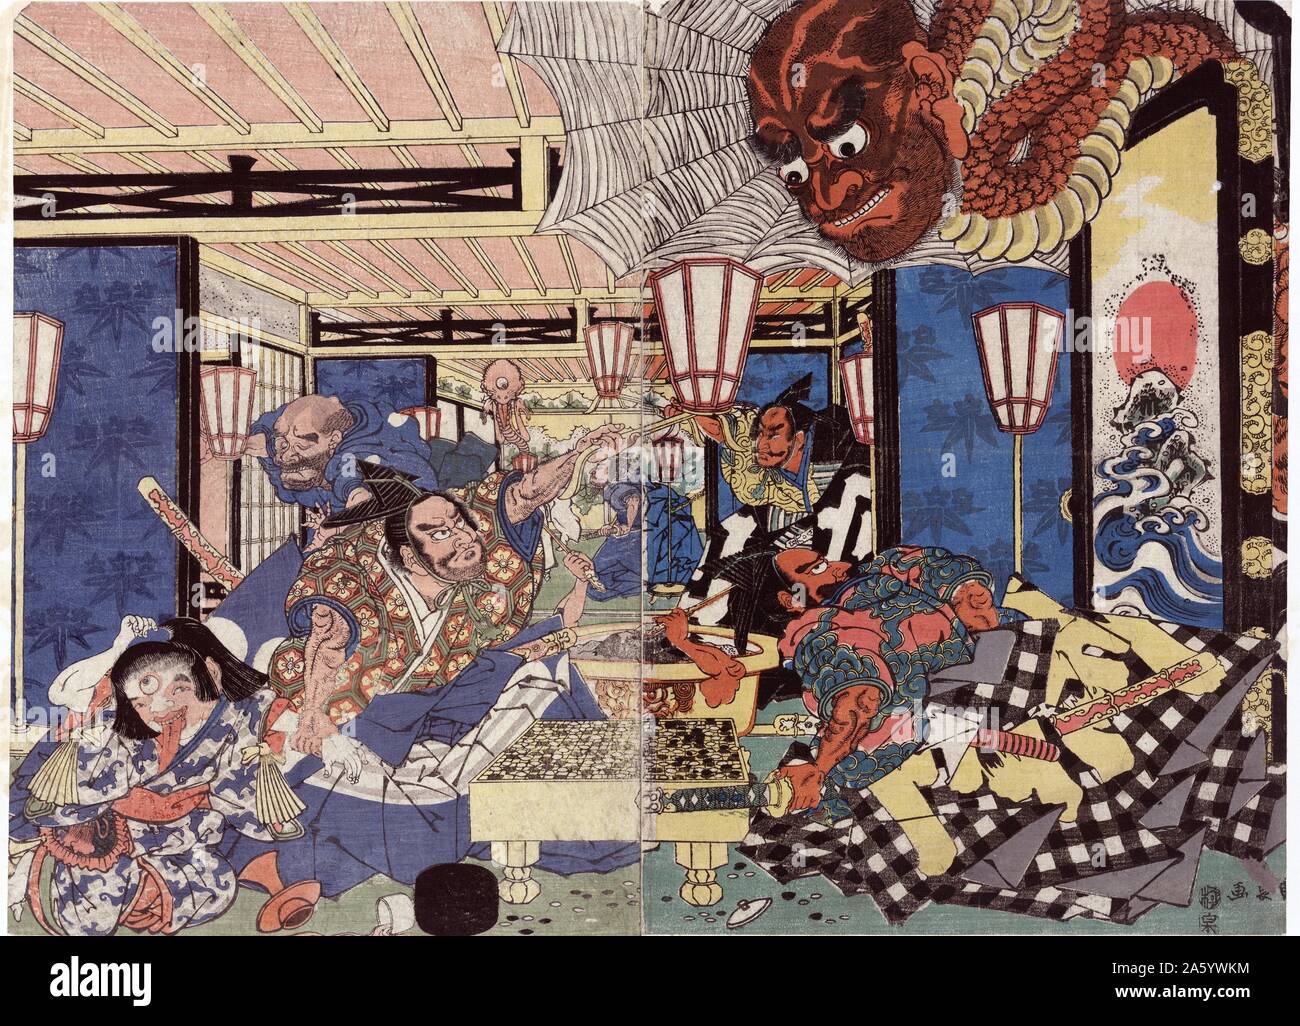 Raiko Shitenno [Minamoto Yorimitsu] and the earth spider.by Kuninaga Utagawa, -1829, artist. Published: [between 1804 and 1808]. woodcut, colour shows an interior view of room with Minamoto Yorimitsu and another man at a Go game board as a demon crashes through the roof. Stock Photo